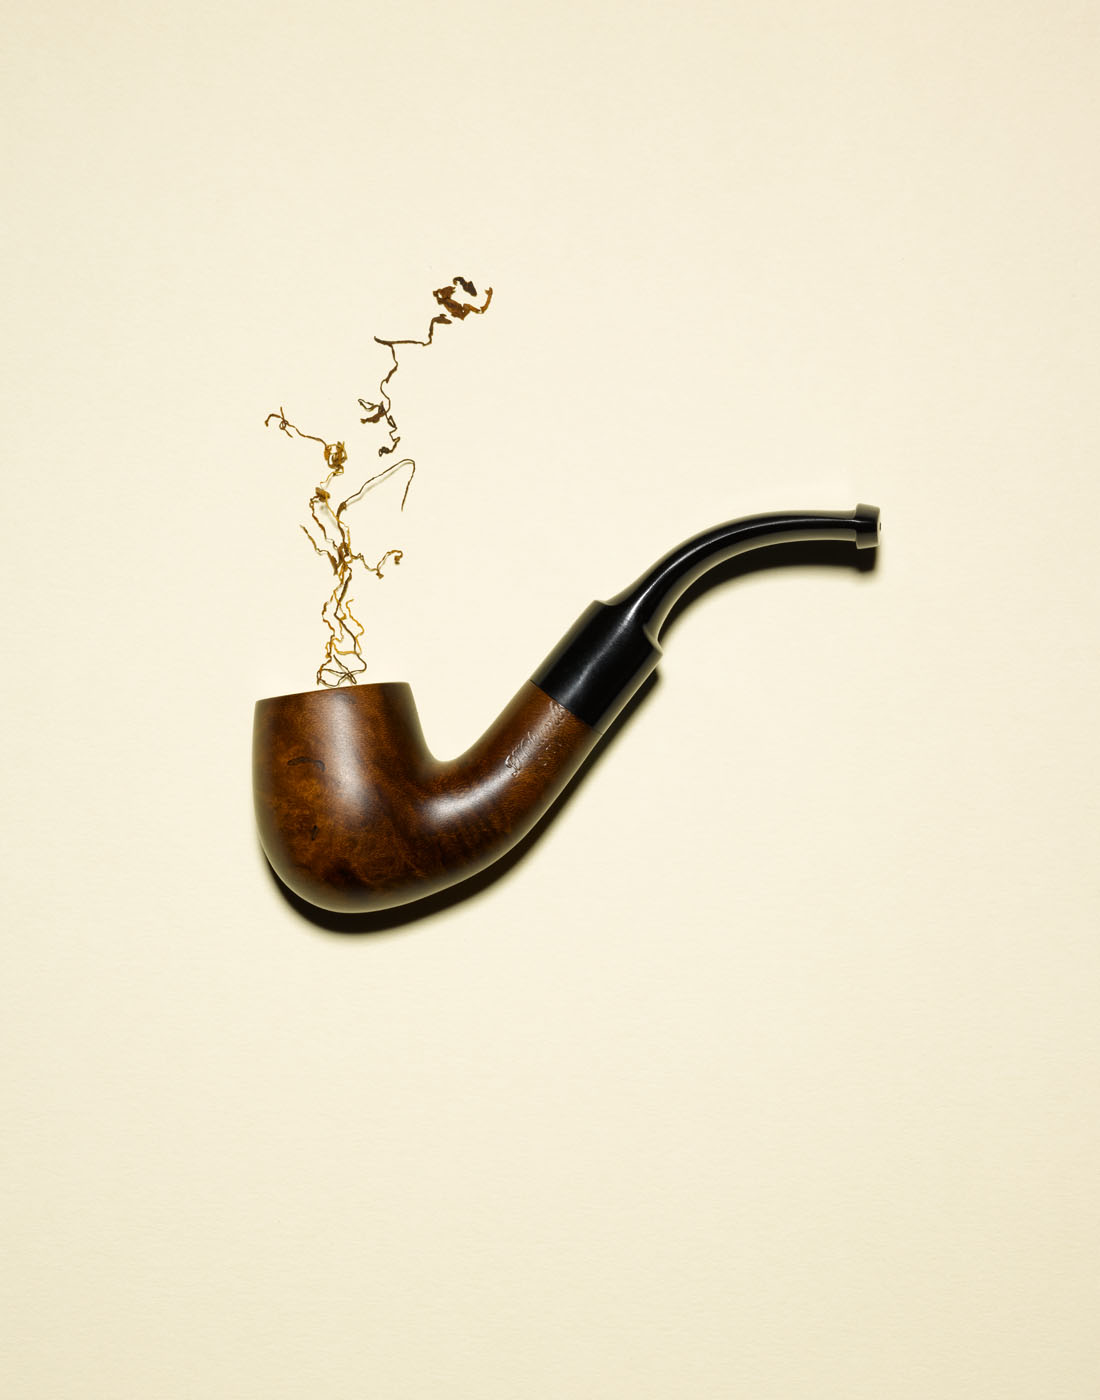 Tobacco smoke coming out of old pipe by Alexander Kent London based still life and product photographer.